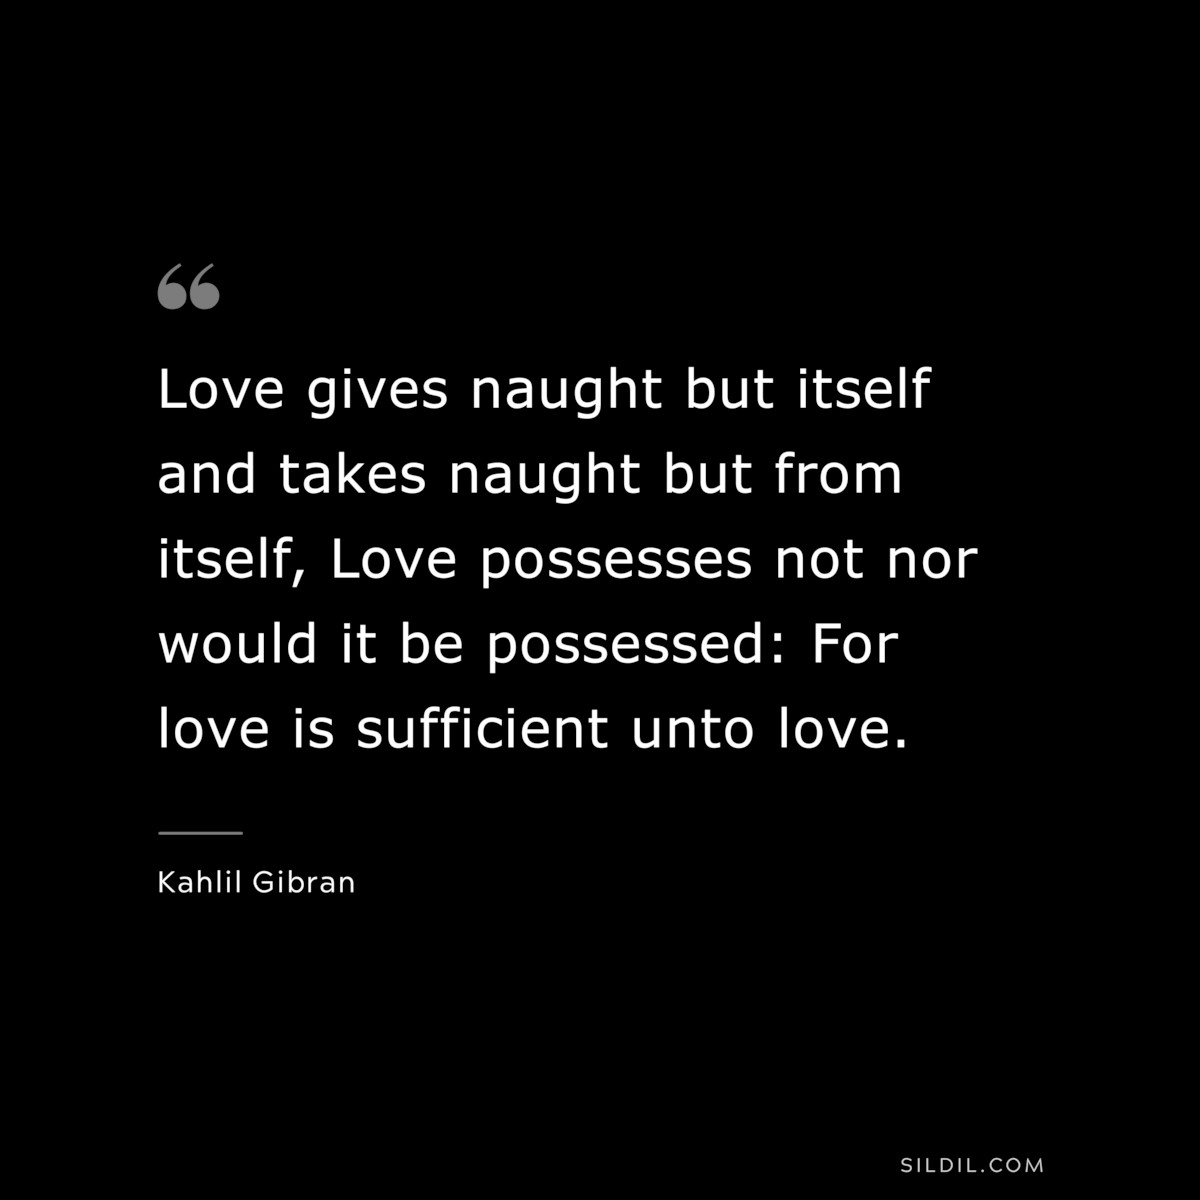 Love gives naught but itself and takes naught but from itself, Love possesses not nor would it be possessed: For love is sufficient unto love. ― Kahlil Gibran